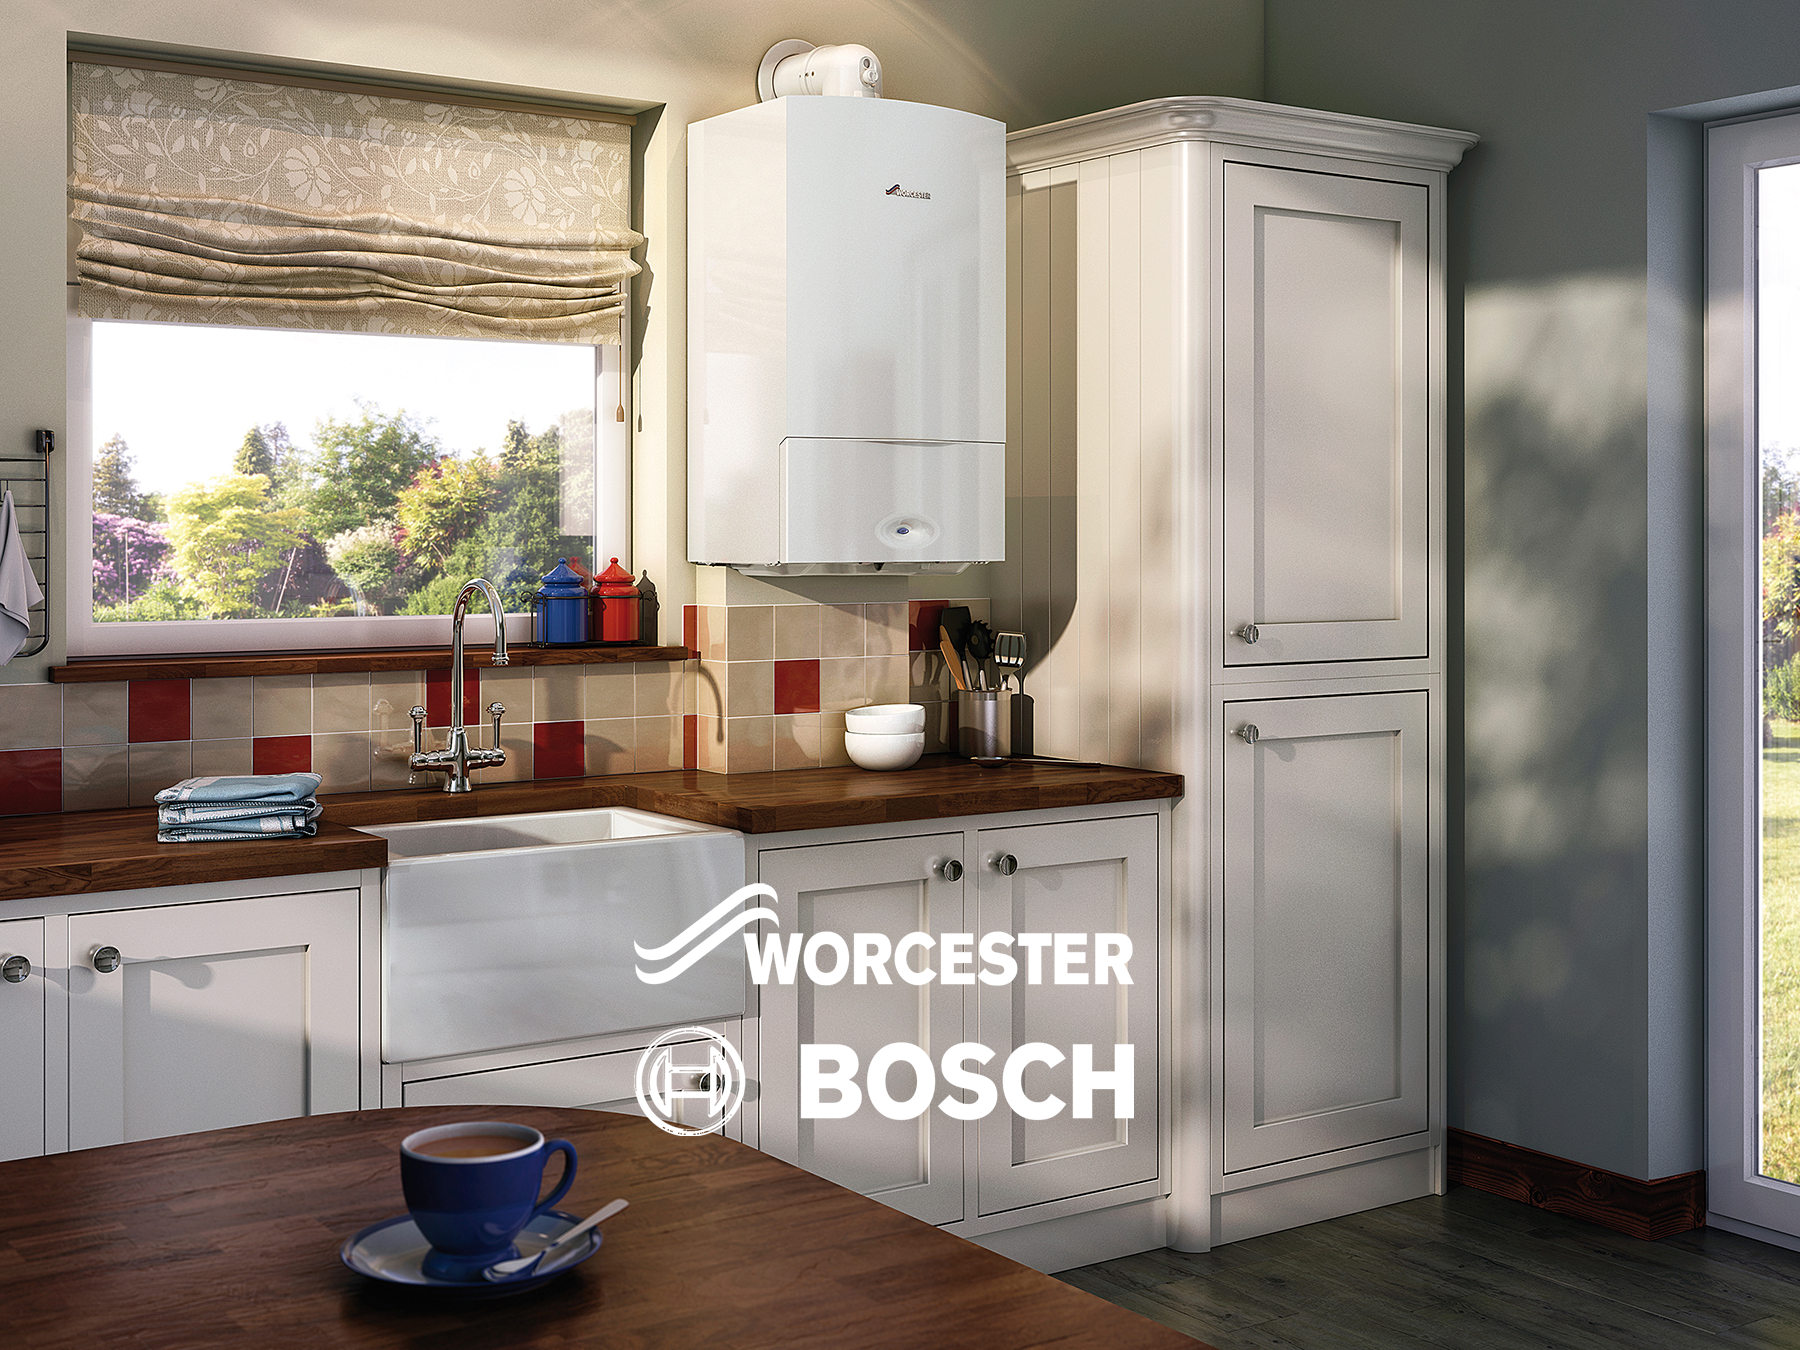 bosch logo with kitchen and boiler in the back ground